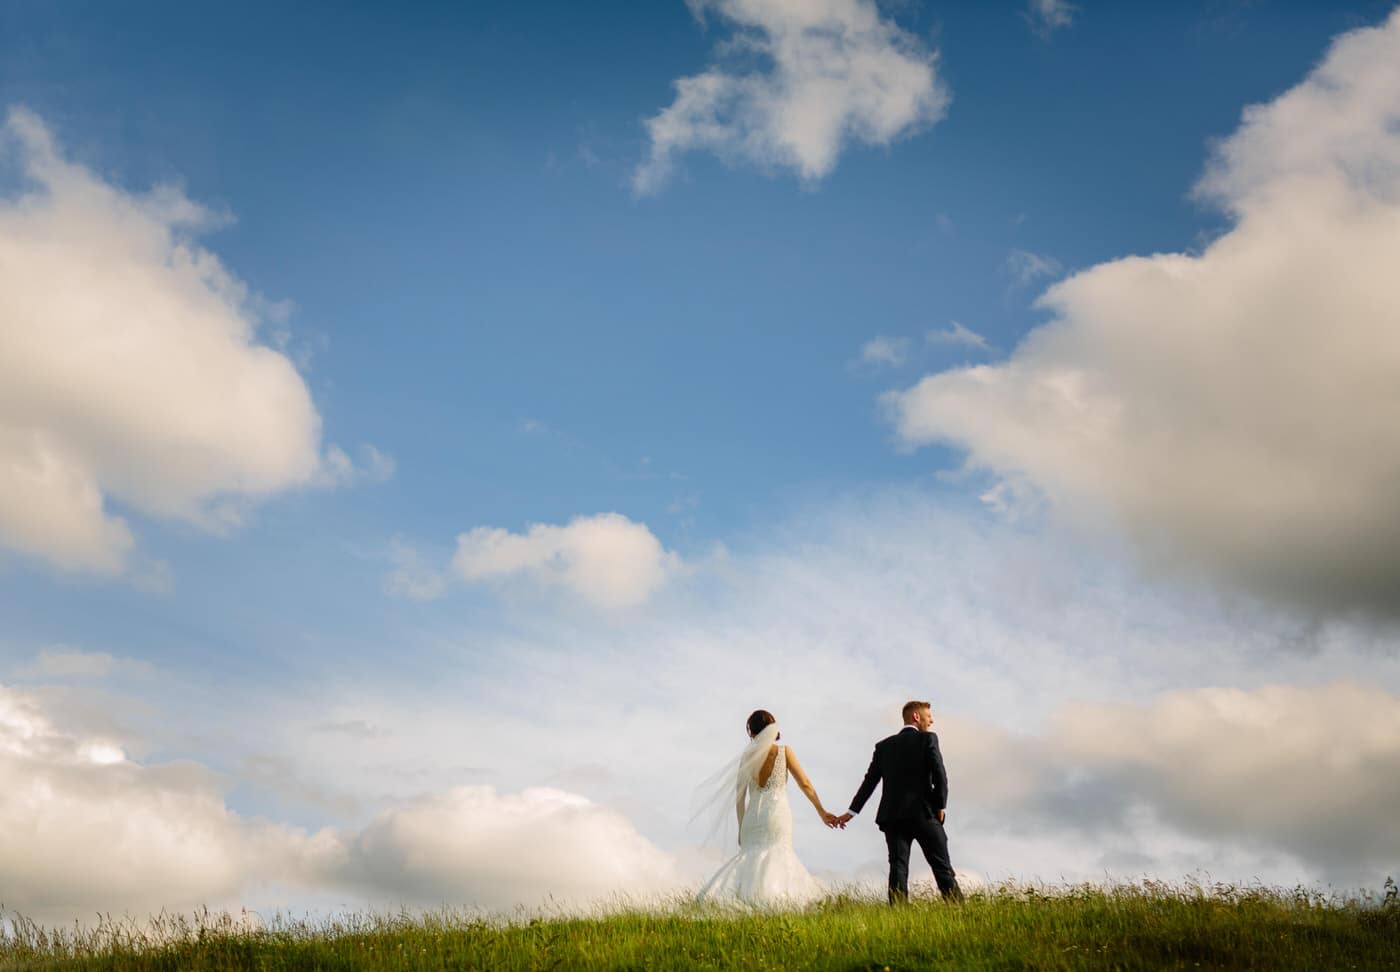 A North Wales wedding couple standing on a grassy hill under a cloudy sky.